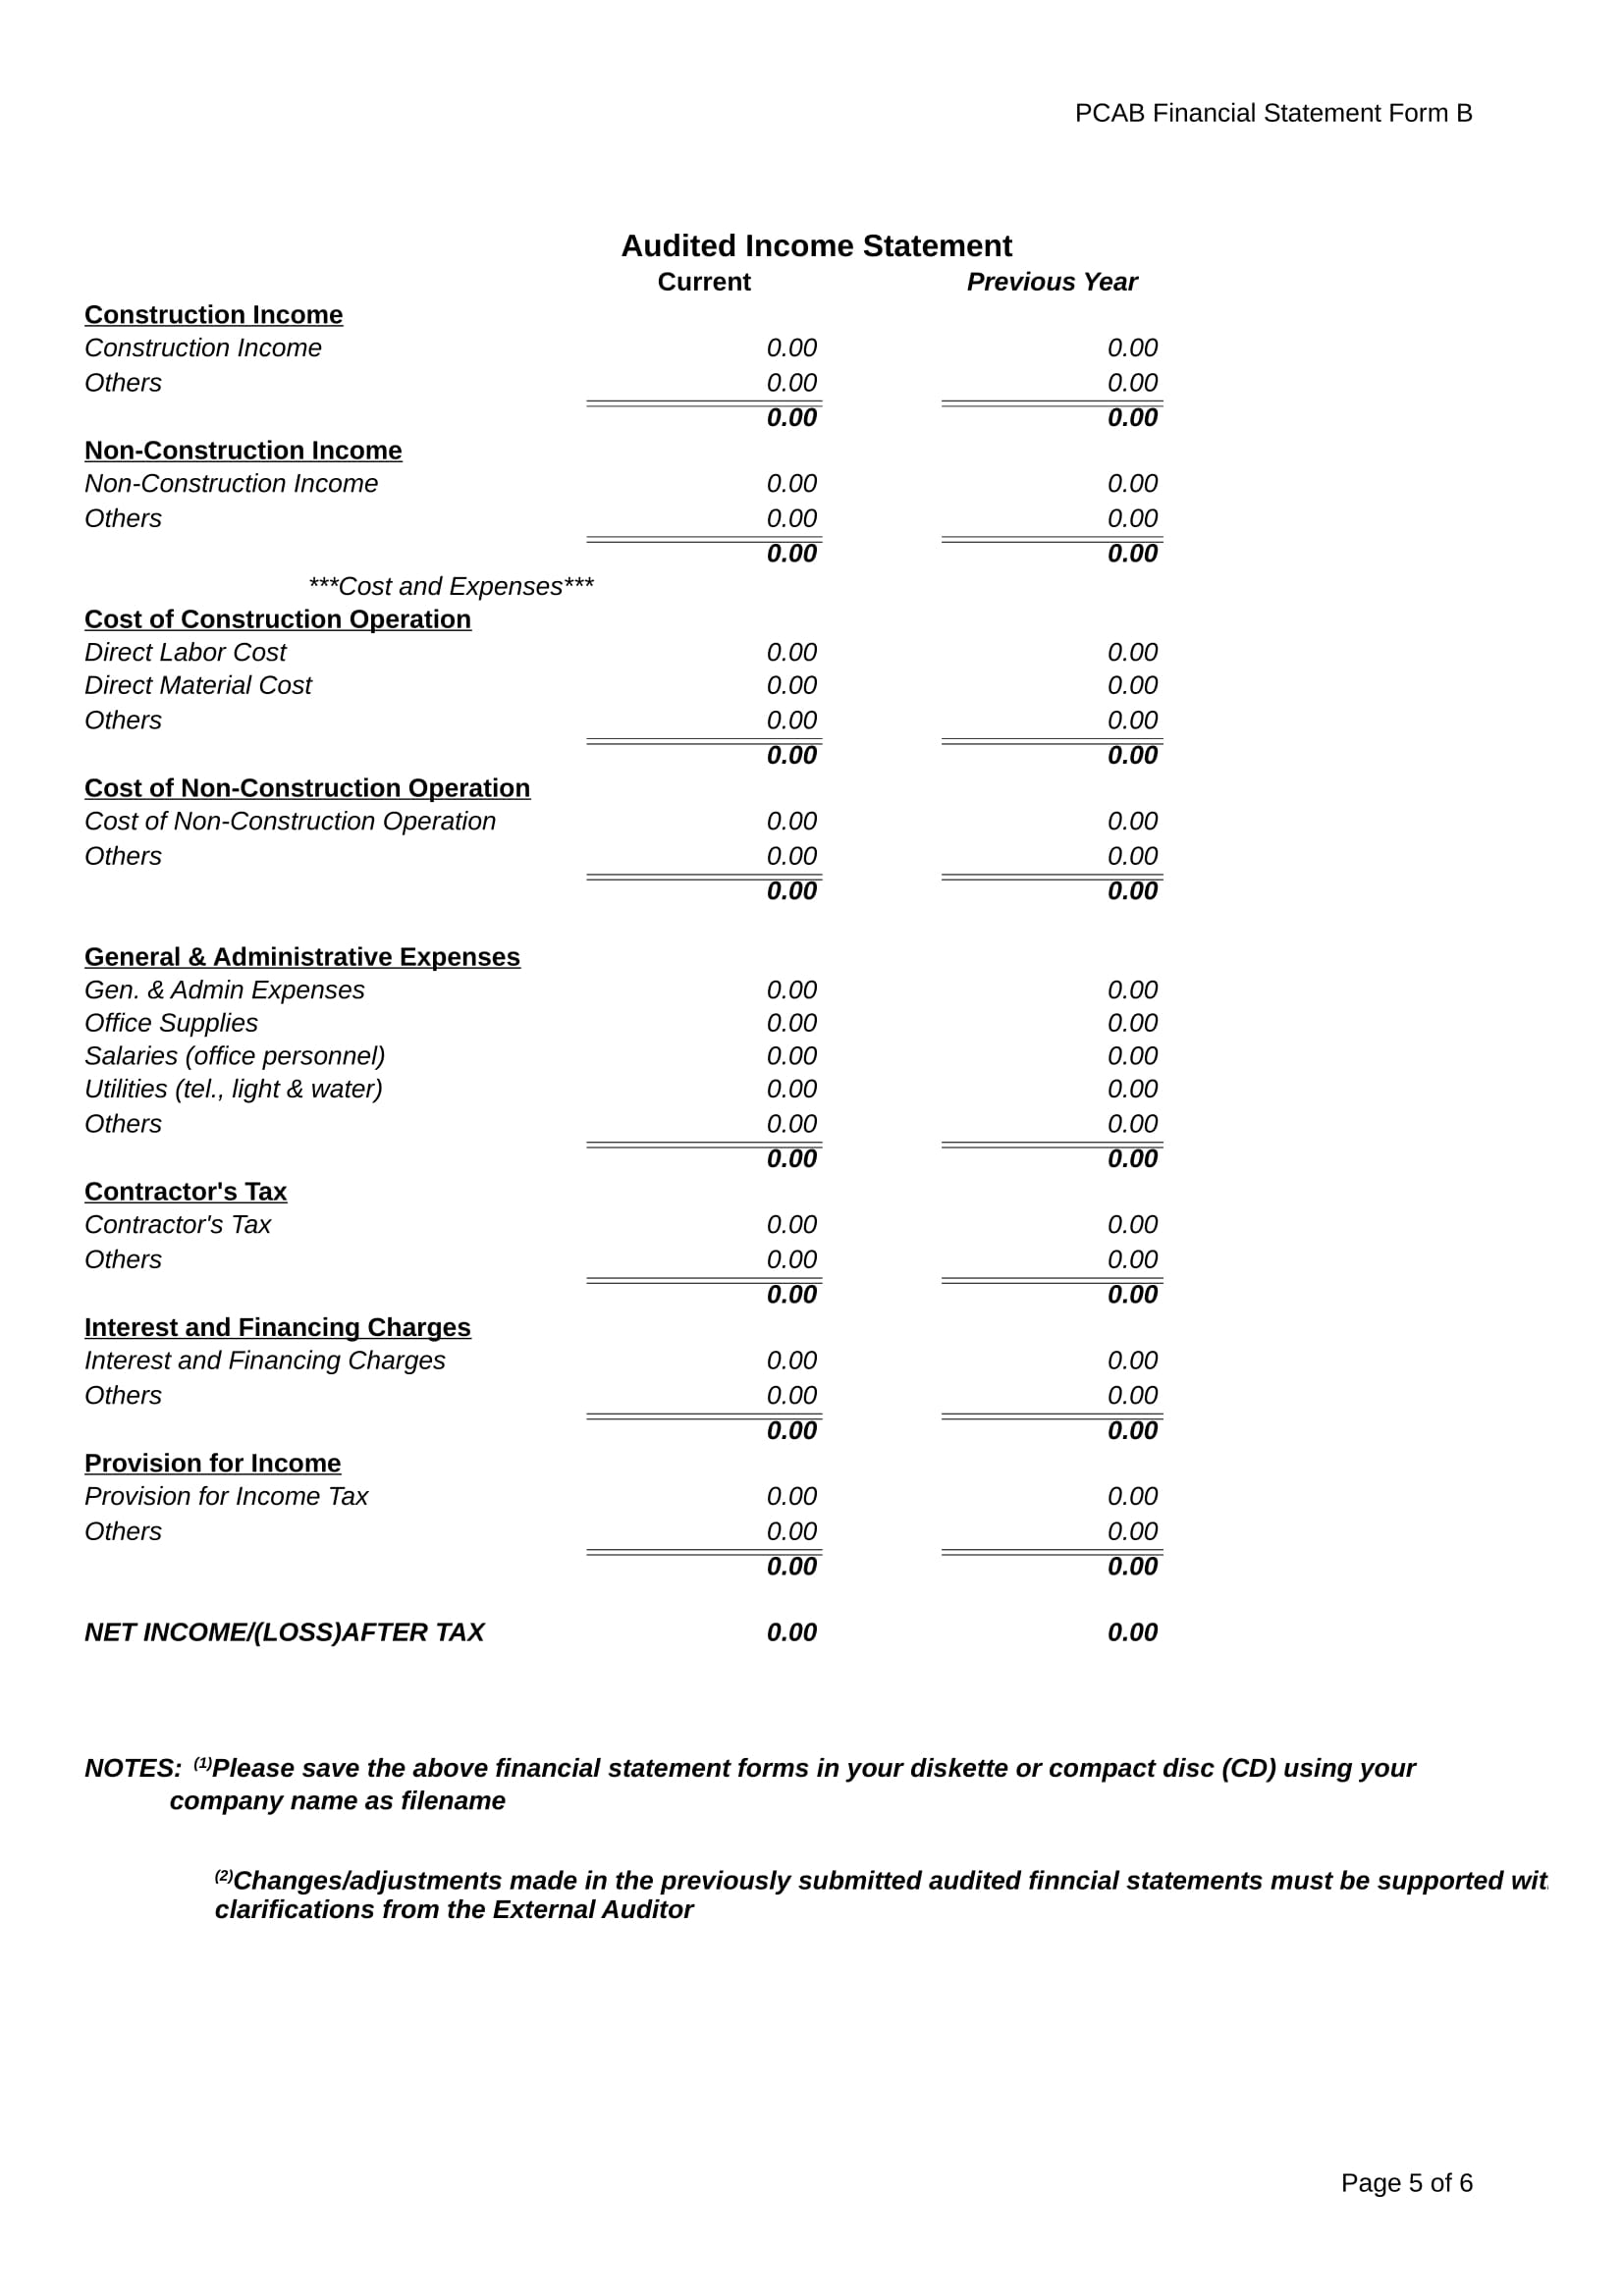 audited income statement form 5